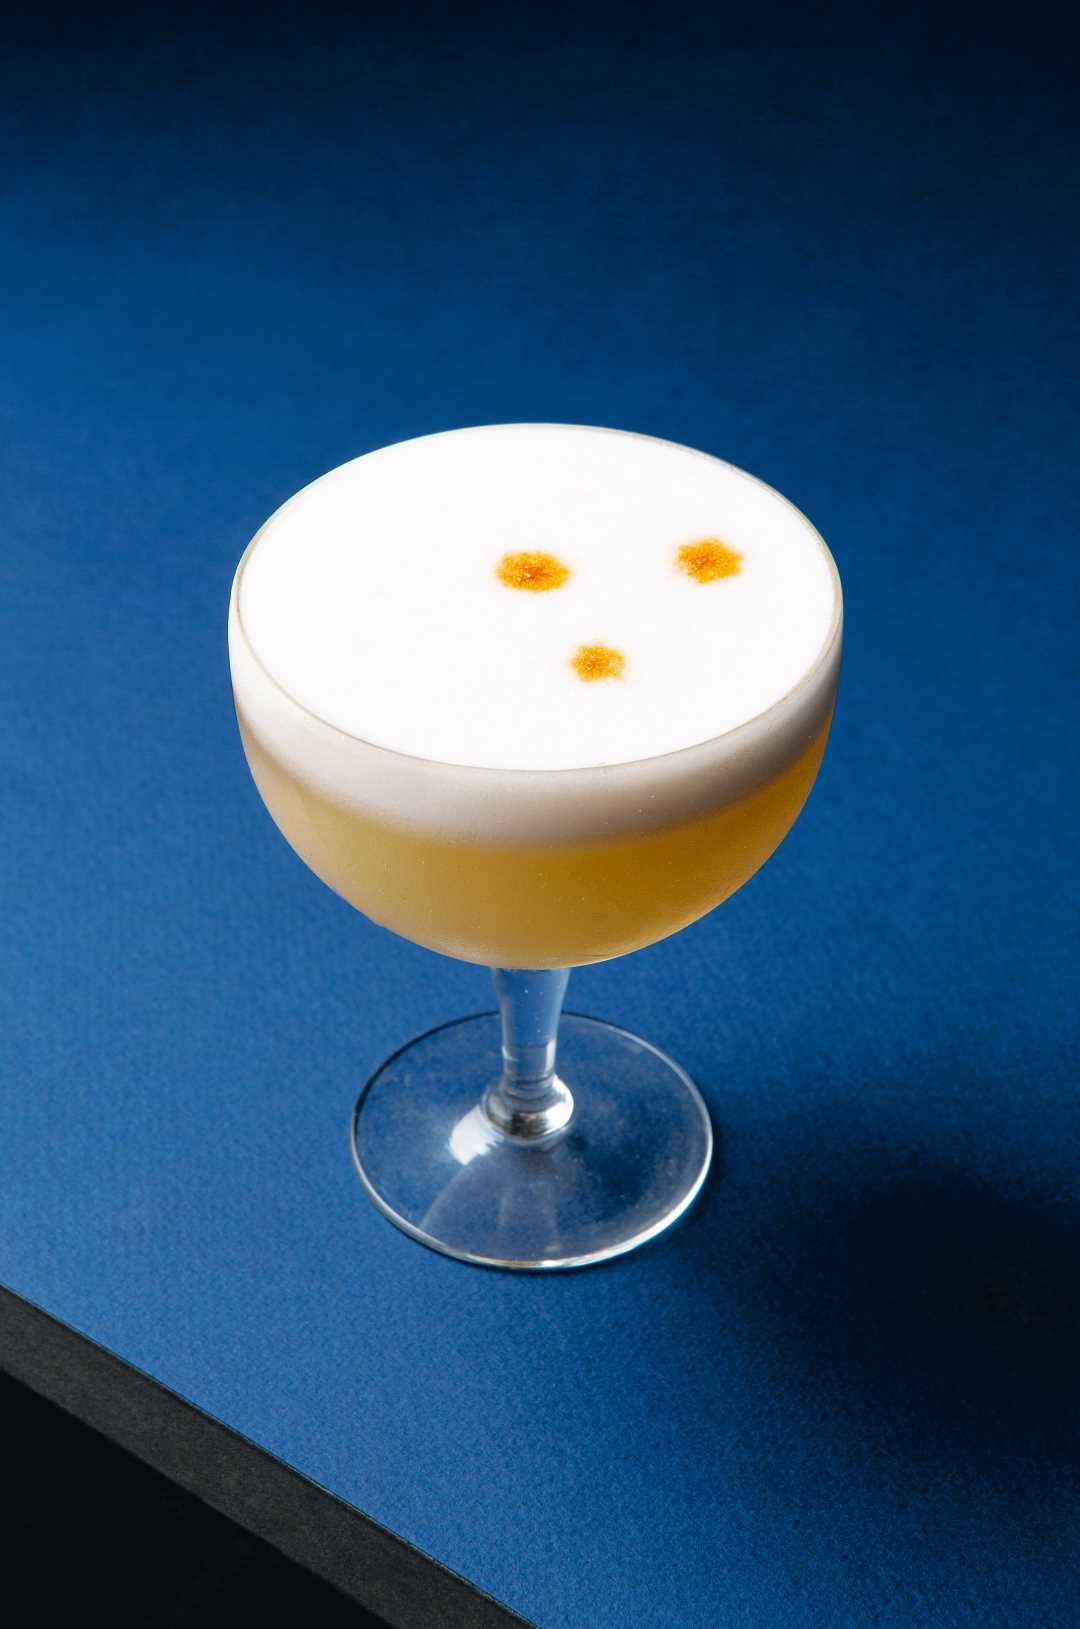 Home bar tenders can froth your egg white for a Pisco Sour using an immersion blender, says the author of Spirited. All photographs by Andy Sewell